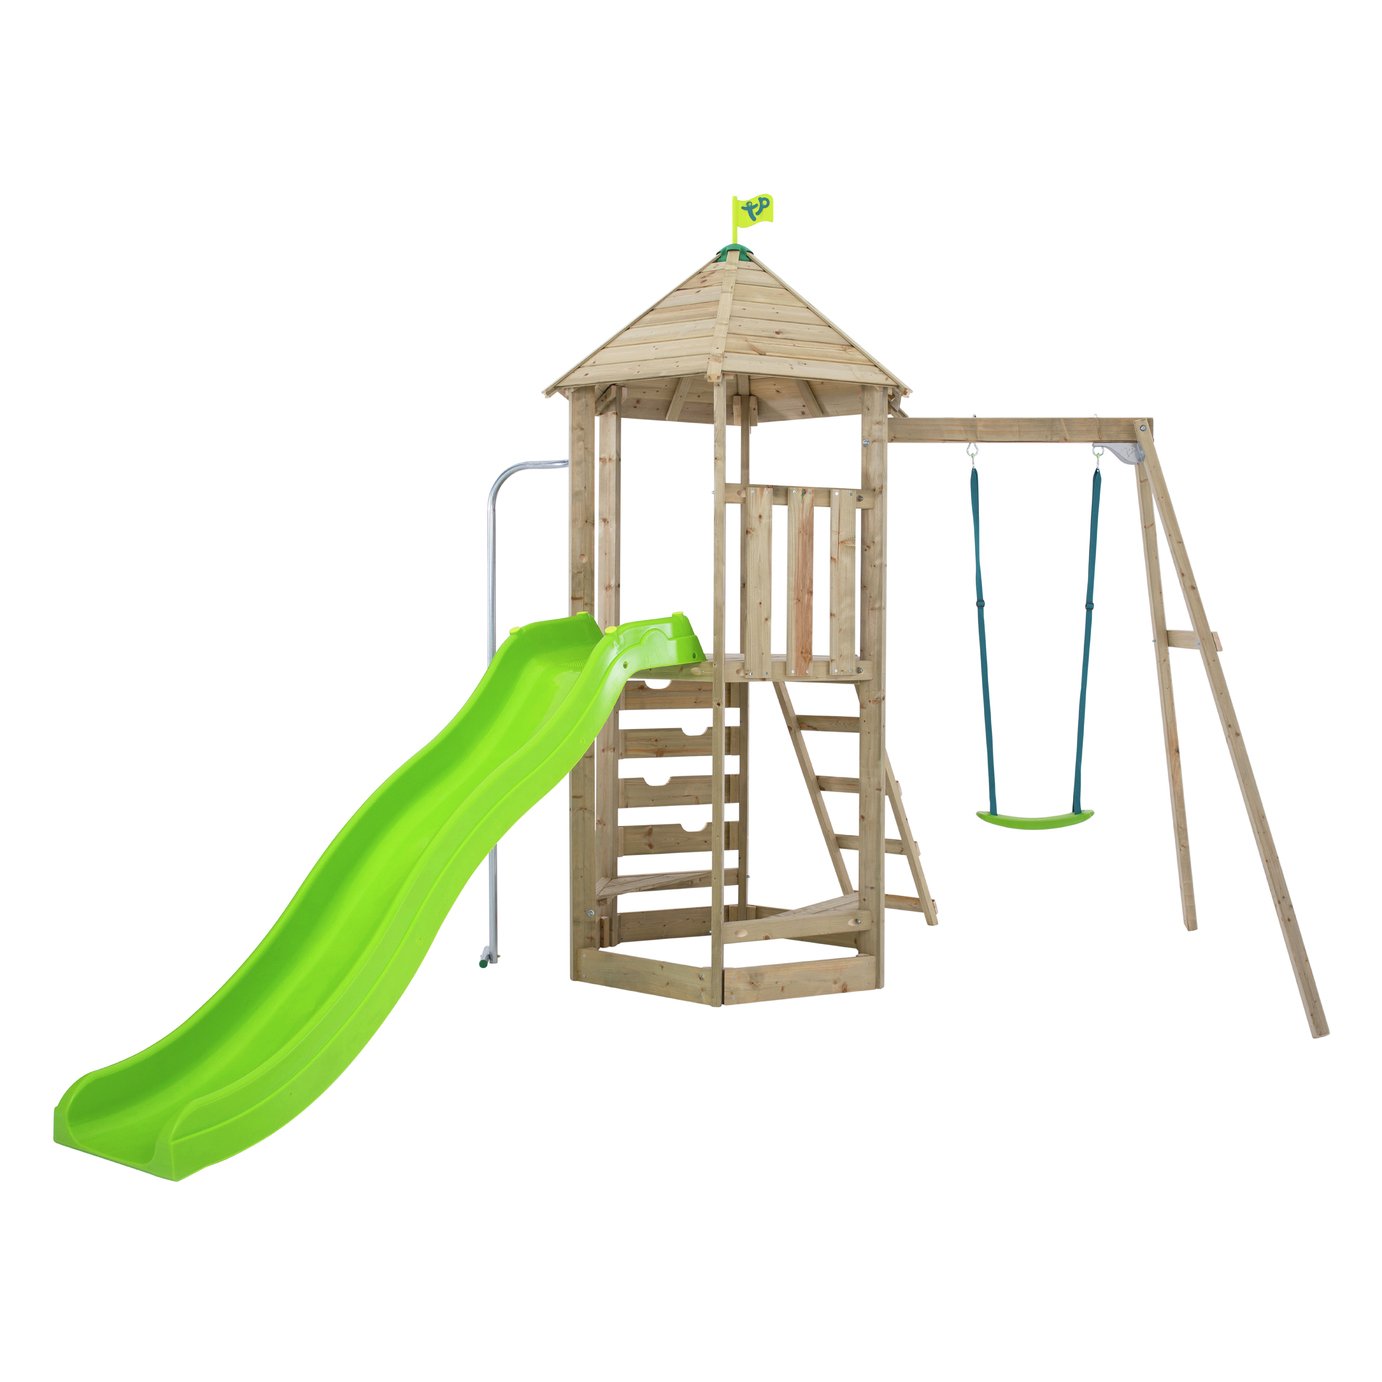 TP Castlewood Wooden Swing and Crazy Slide Review